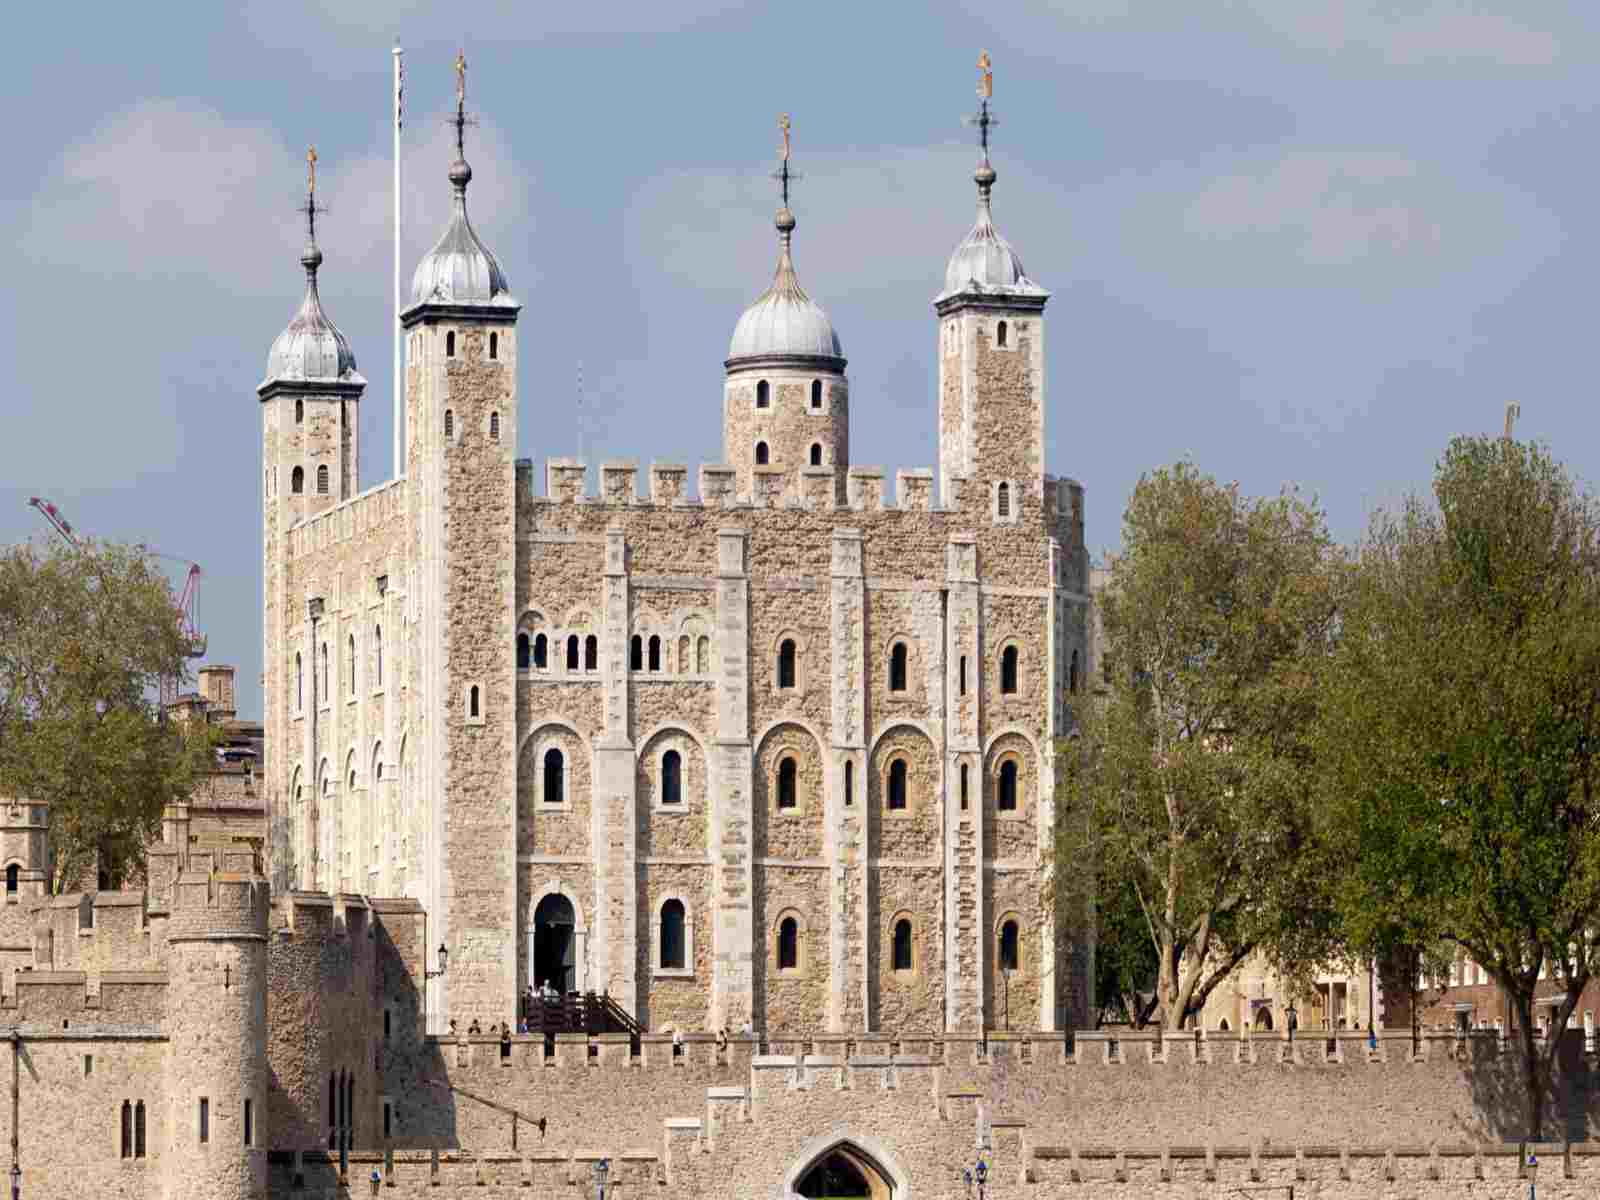 tours at tower of london